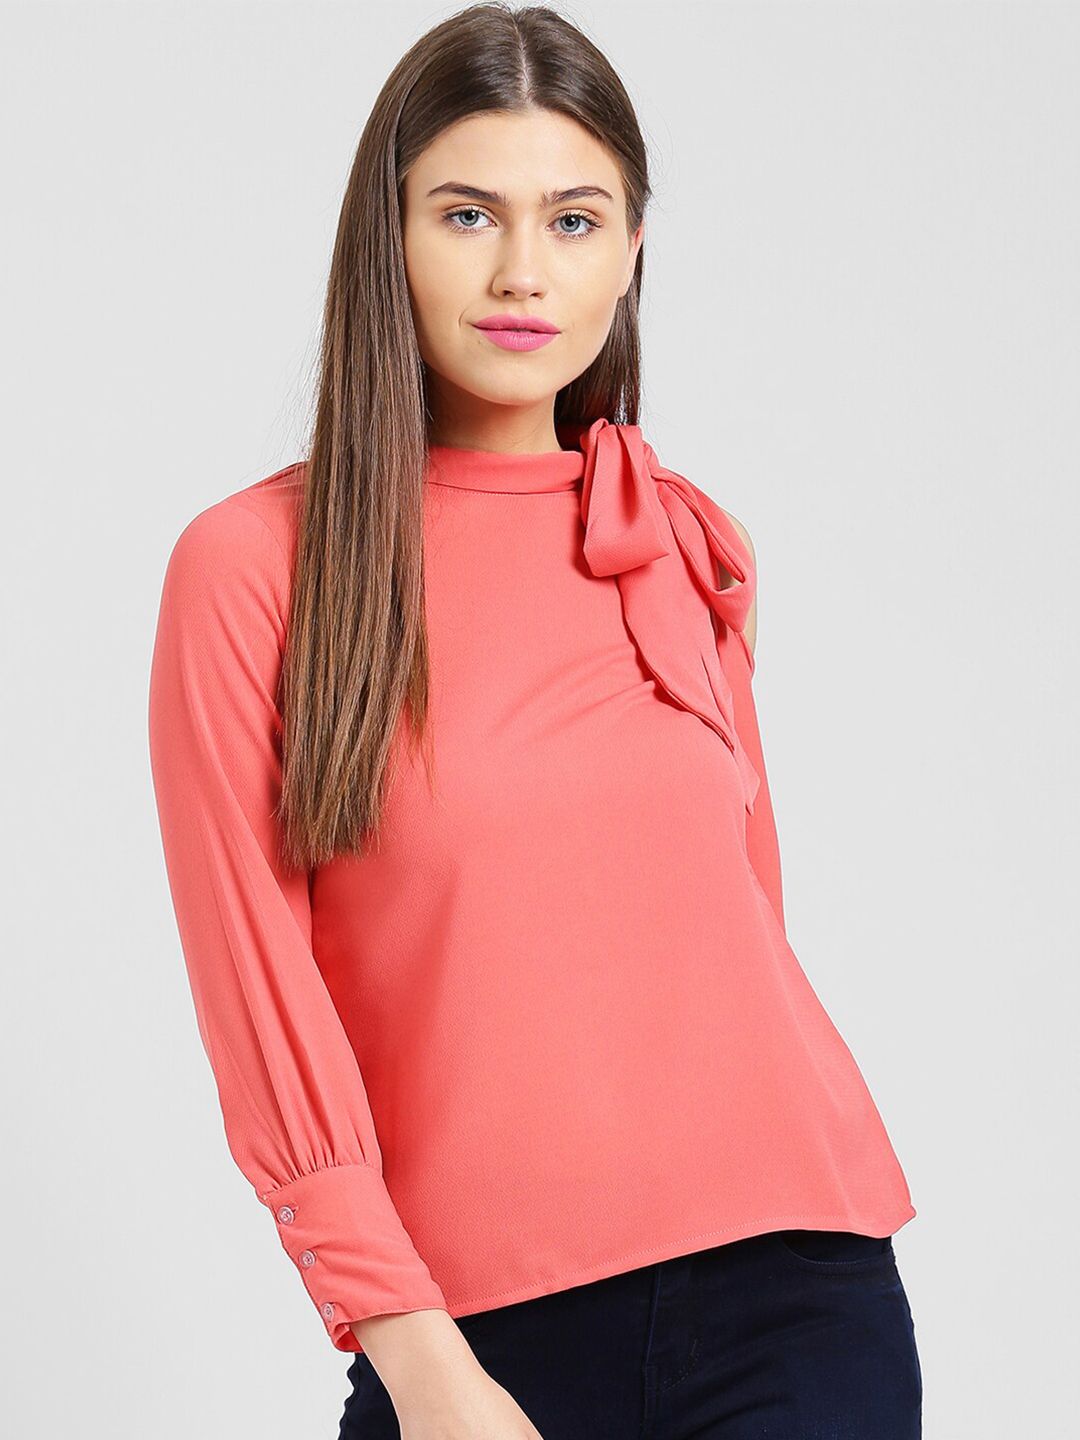 Be Indi Women Pink Tie-Up Neck Top Price in India